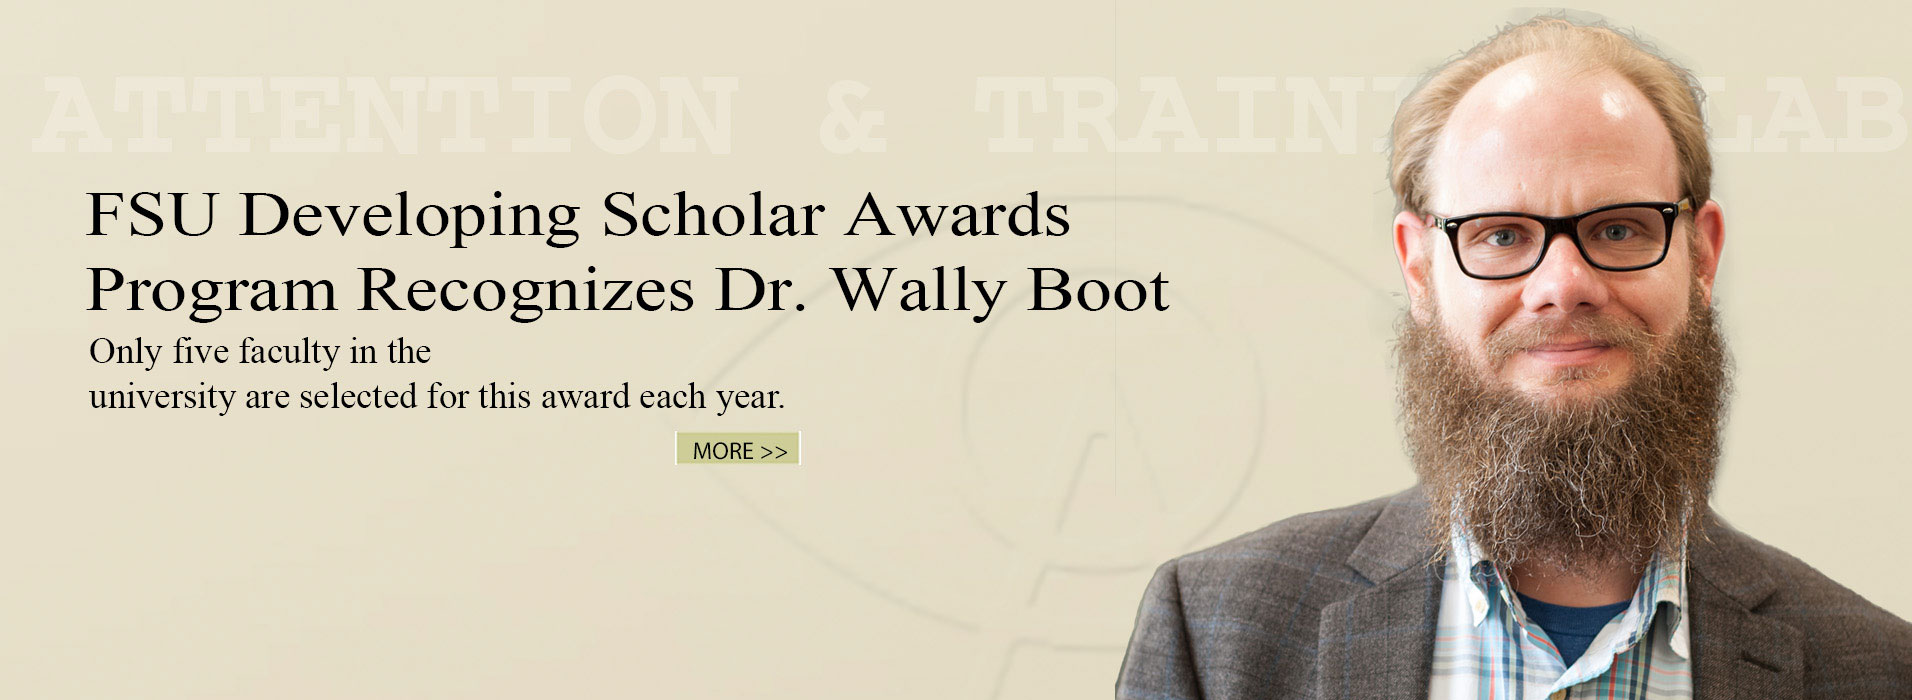 Walter Boot graphic